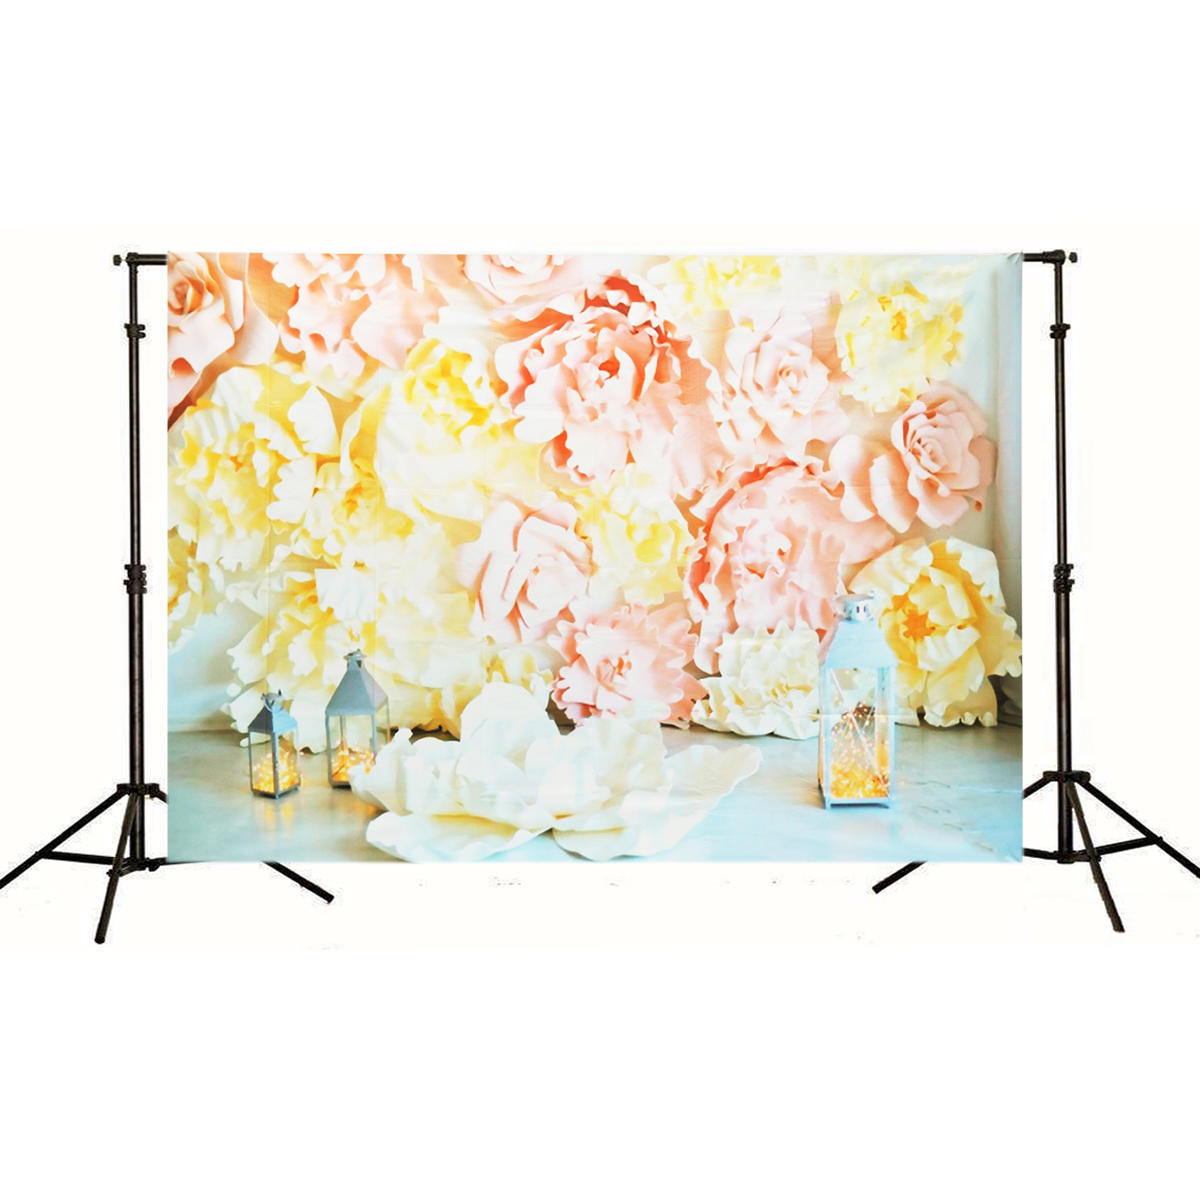 7x5ft 3D Balloon Niches Colourful Flower Thin Vinyl Photography Backdrop Background Studio Prop